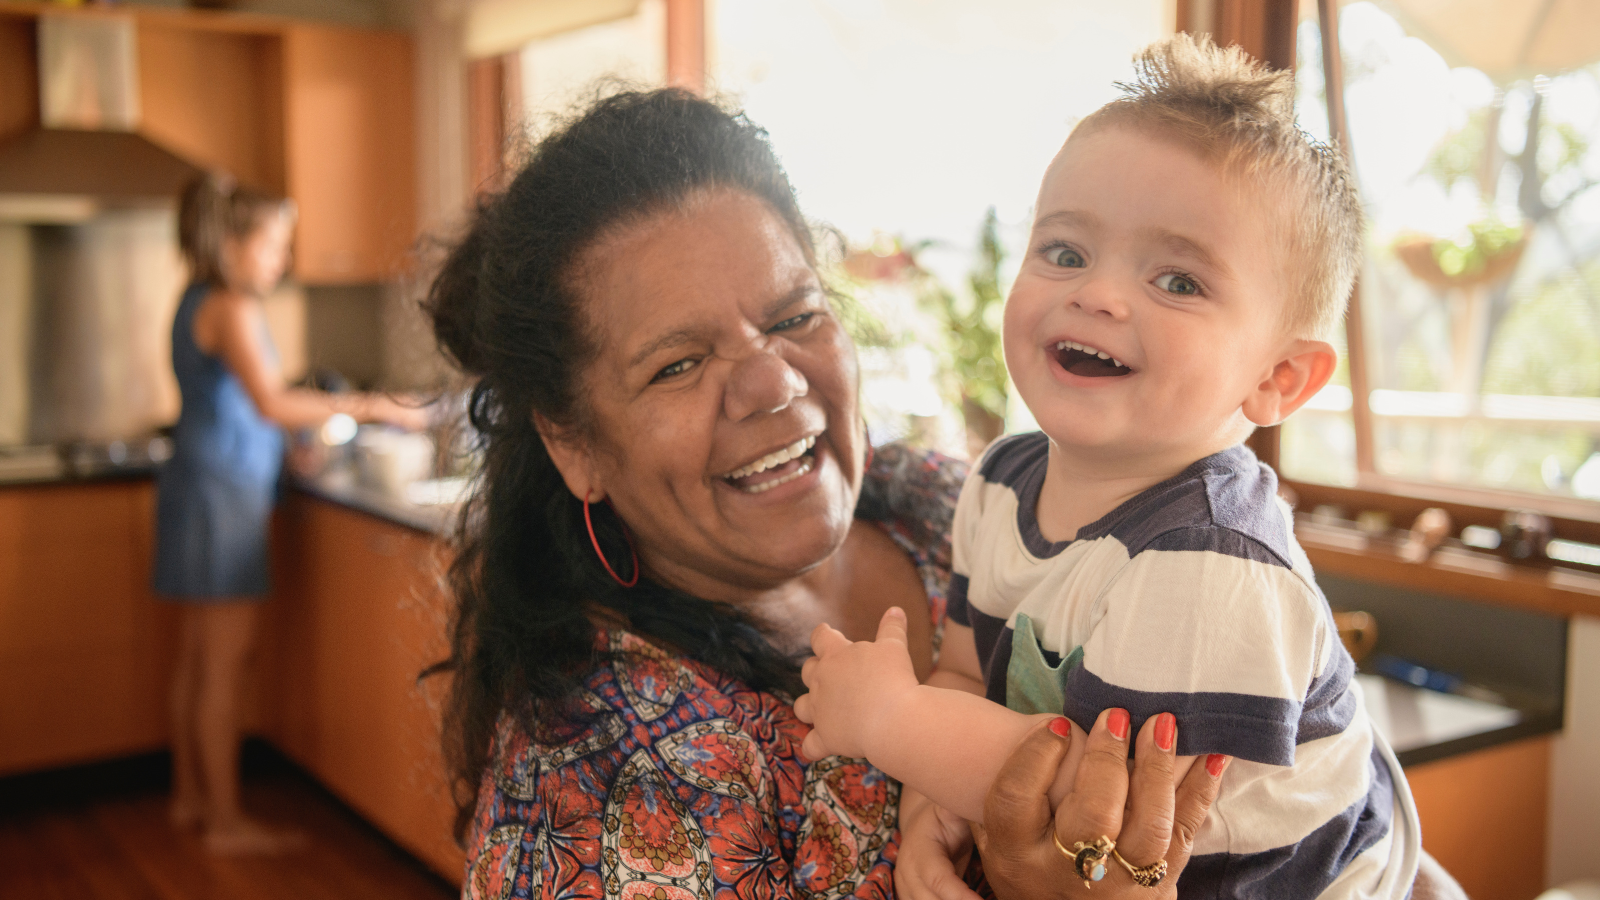 A senior woman holding her baby grandson and smiling in a kitchen.